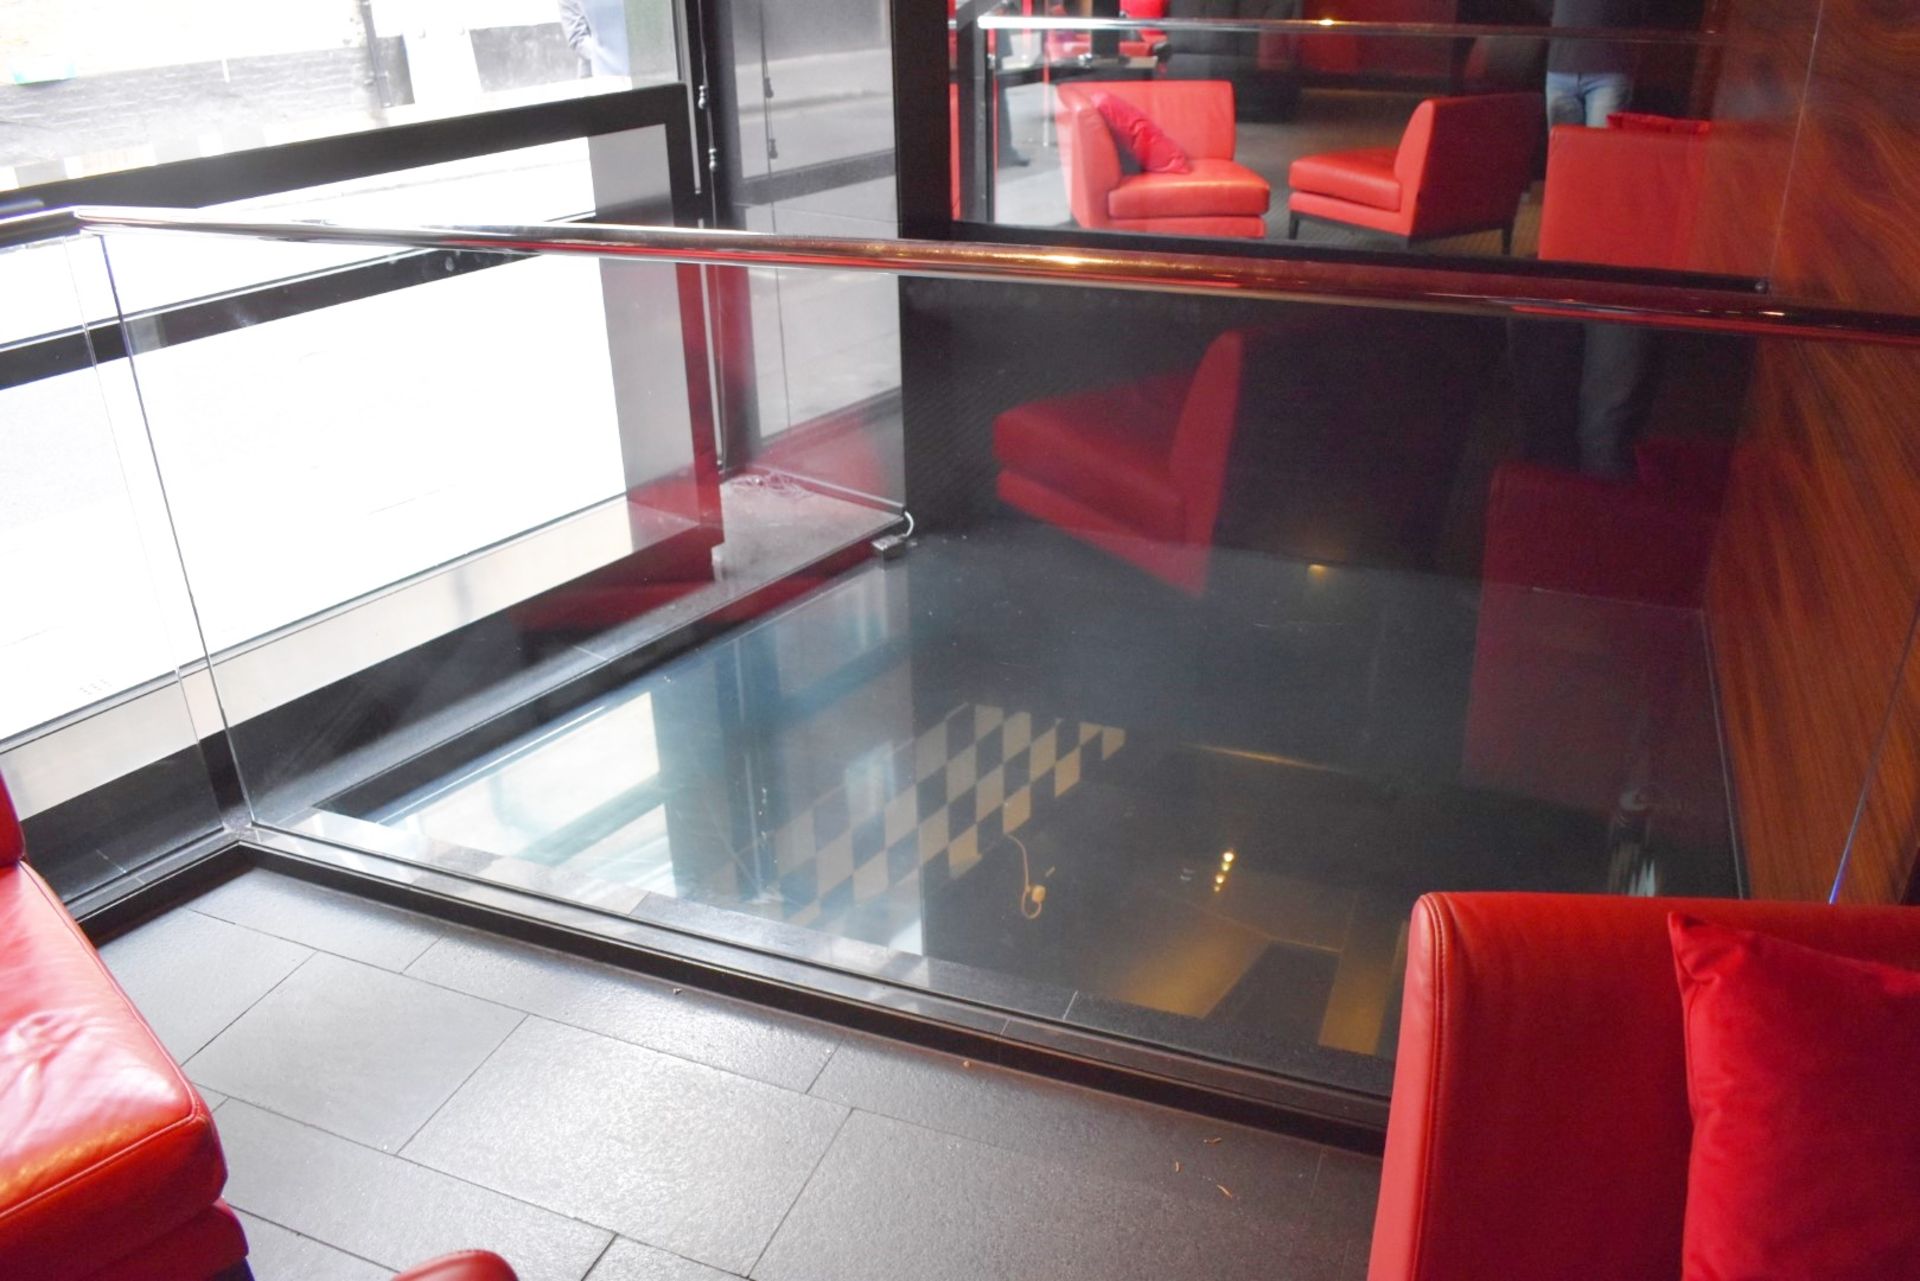 1 x Smoked Glass Floor Panel Insert - Approx Dimensions 180 x 230 x 110 x 204 cms - CL392 - Ref - Image 2 of 2